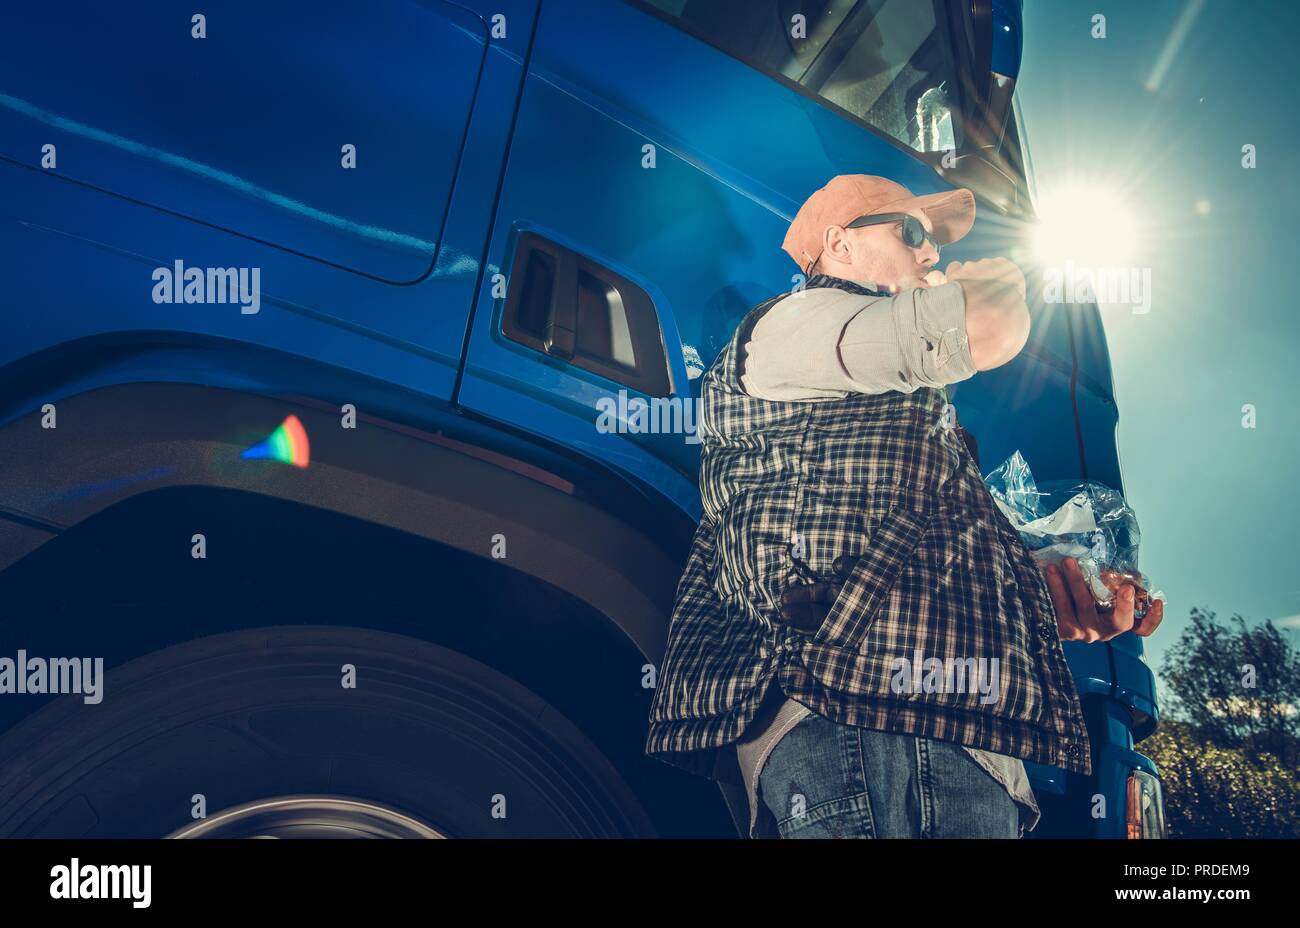 Semi Truck Driver Lunch Brake in the Sun. Caucasian Trucker Enjoying His Meal in Front of His Vehicle. Stock Photo